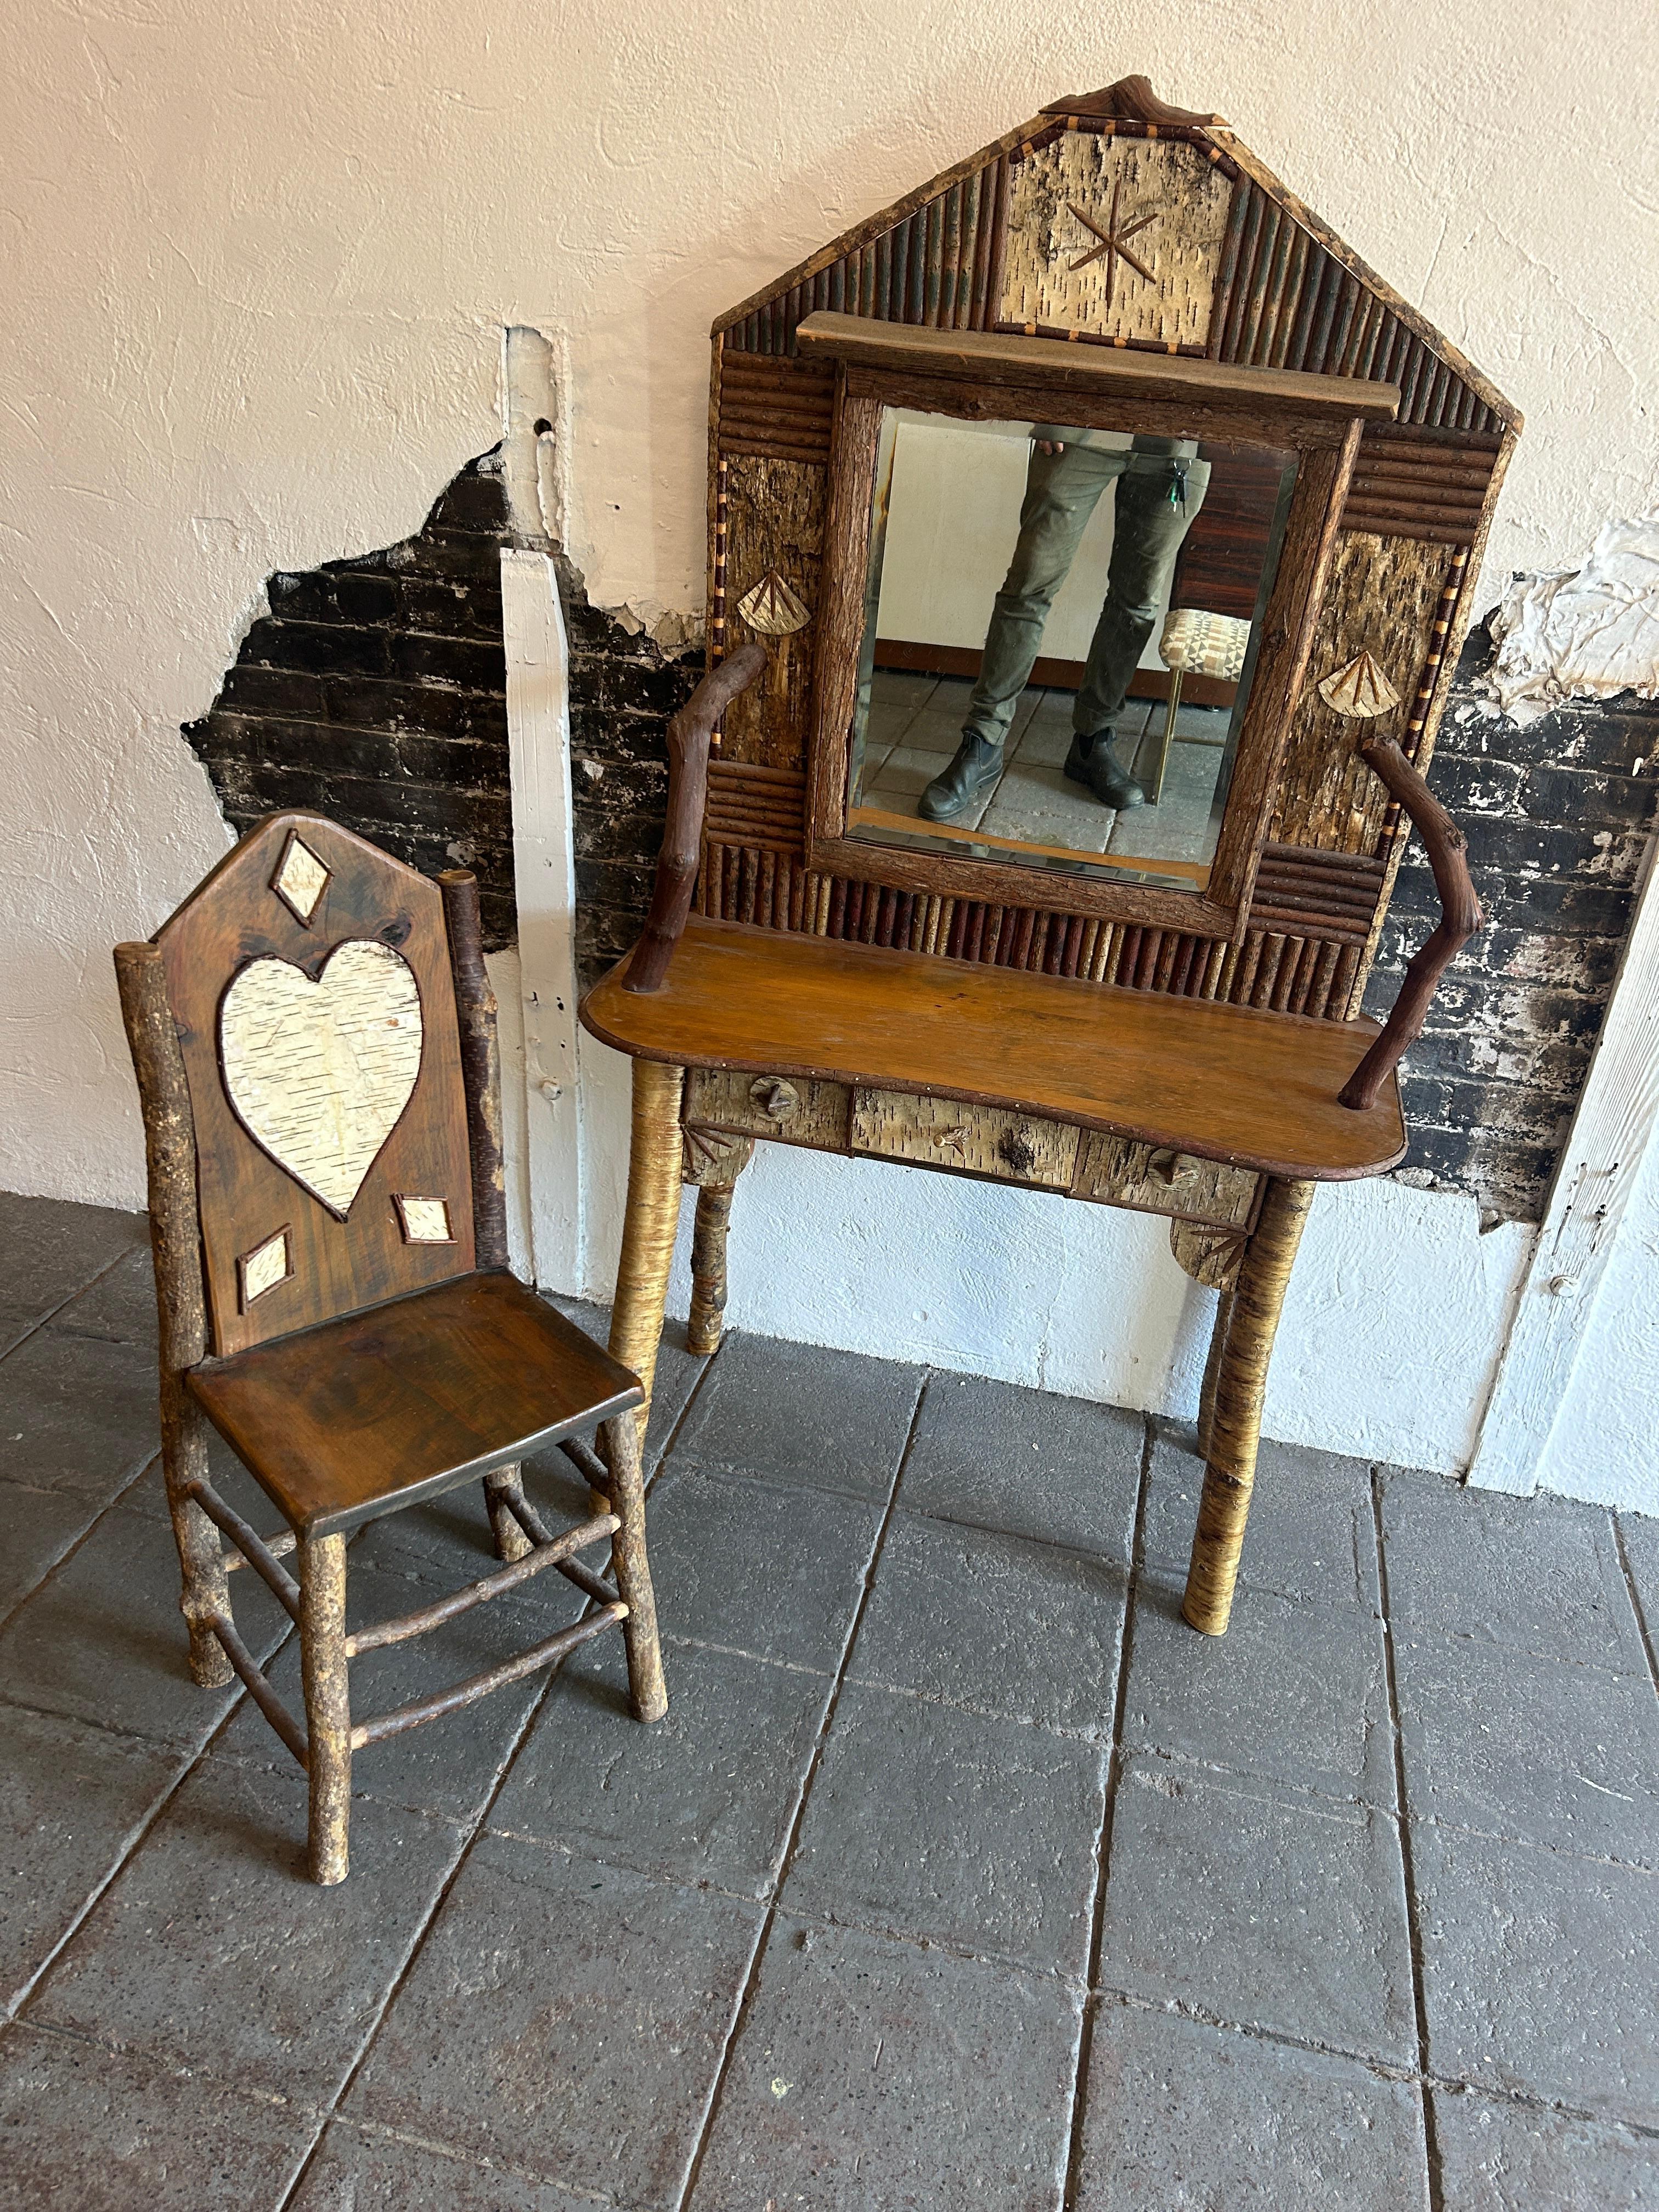 Late 20th Century Whimsical rustic Adirondack child’s Vanity Mirror desk and chair studio craft For Sale